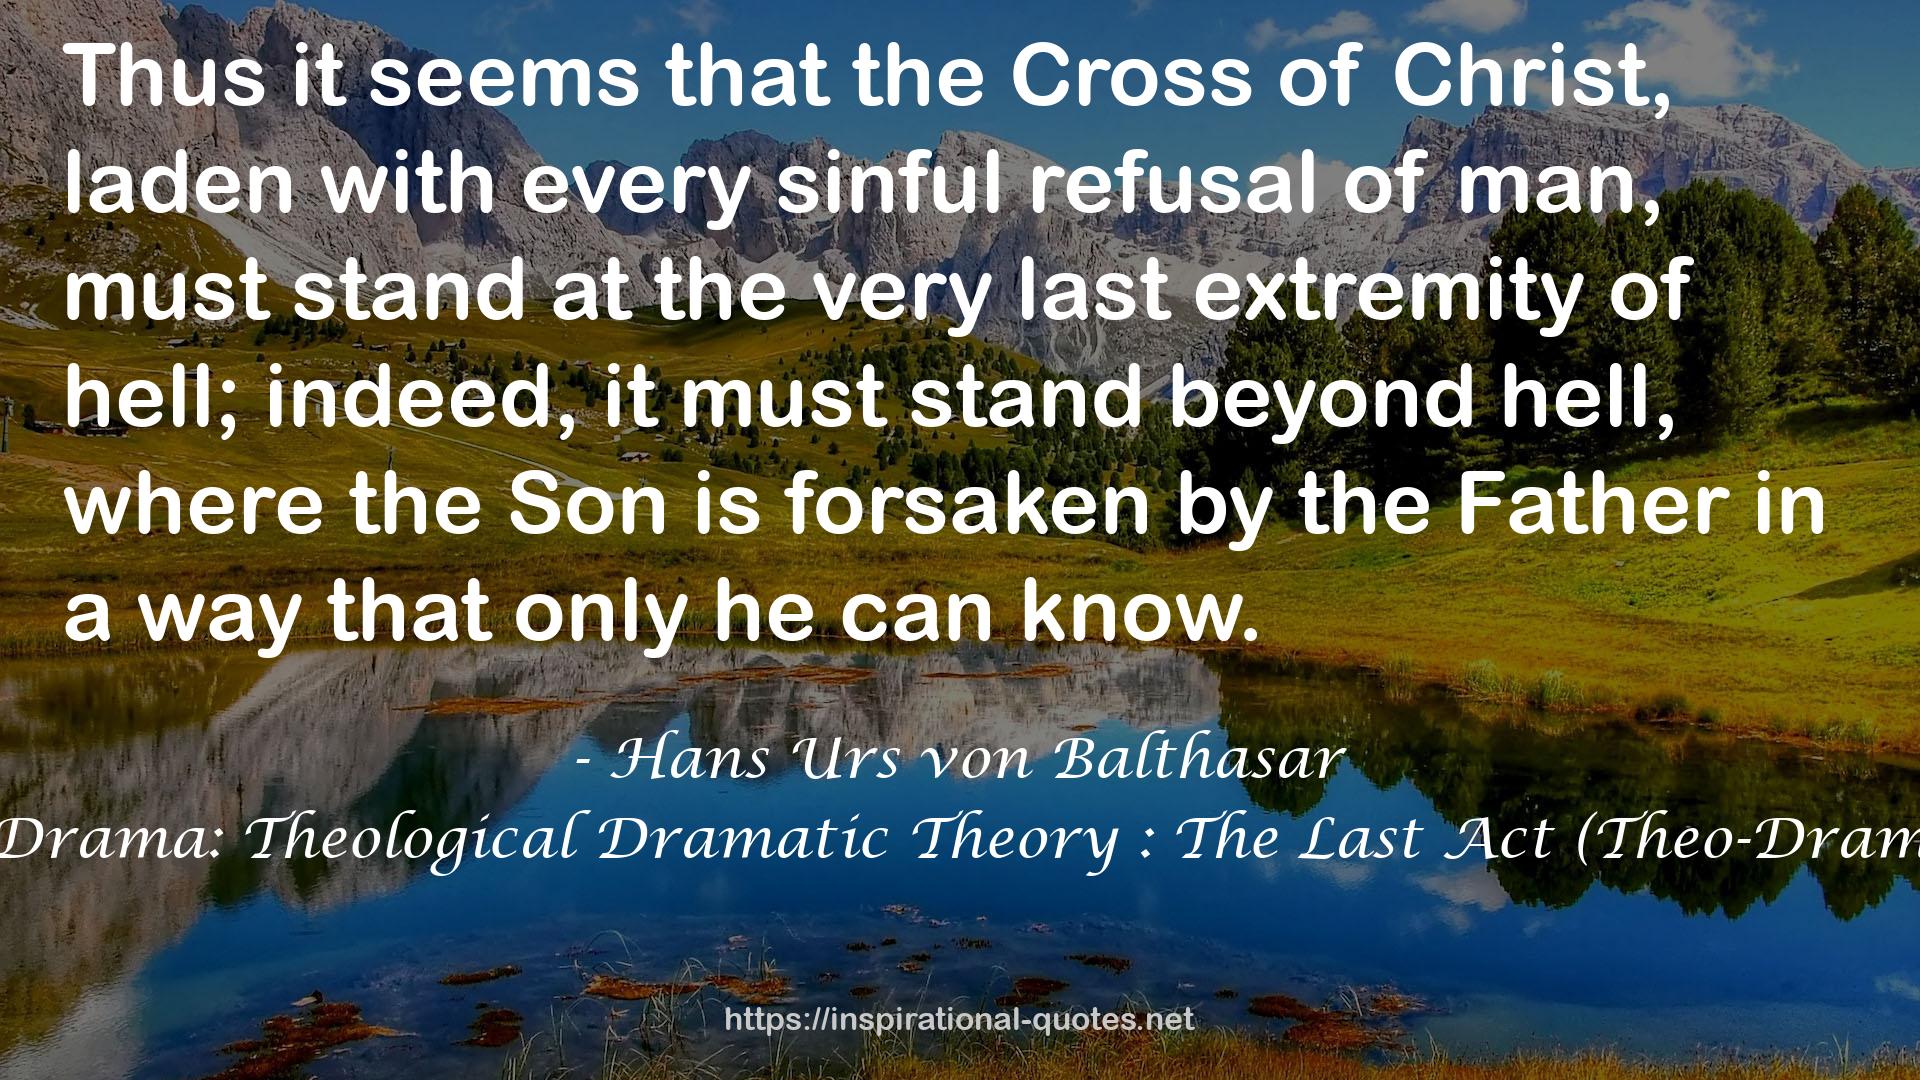 Theo-Drama: Theological Dramatic Theory : The Last Act (Theo-Drama, #5) QUOTES